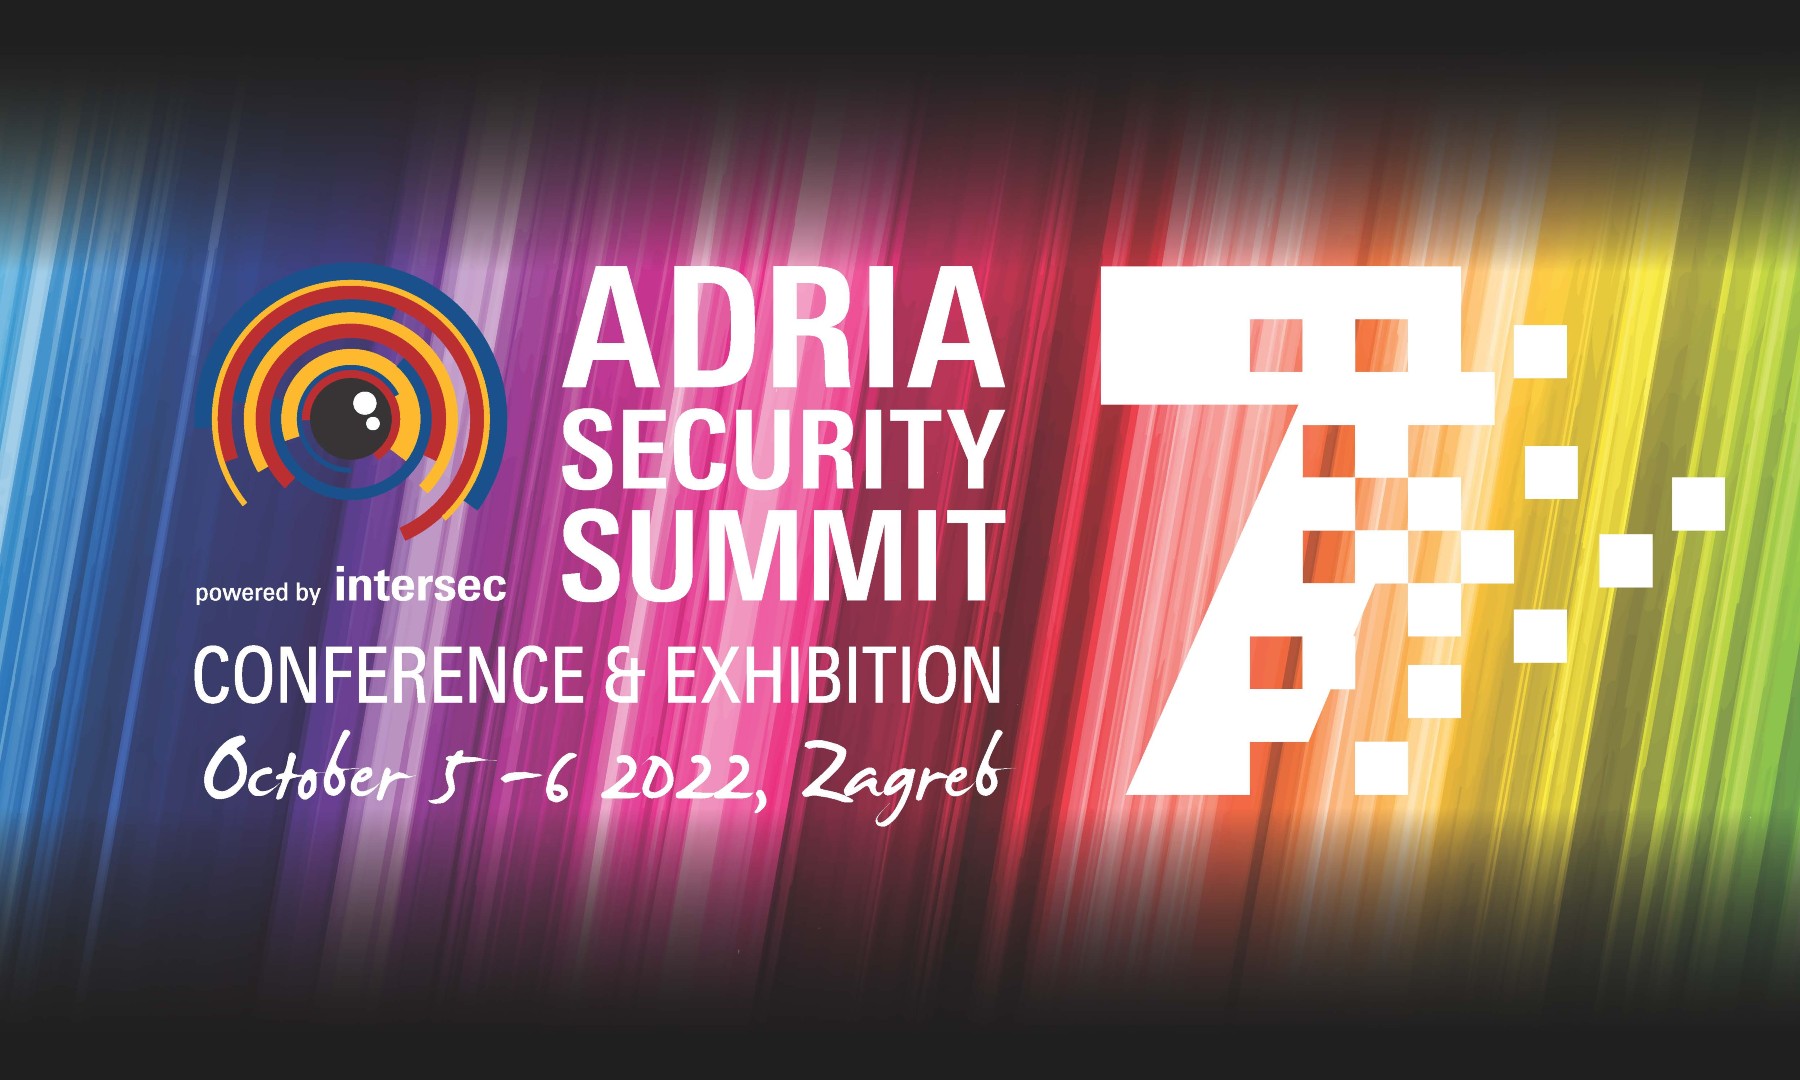 Adria Security Summit 2022 Returns to Zagreb in October